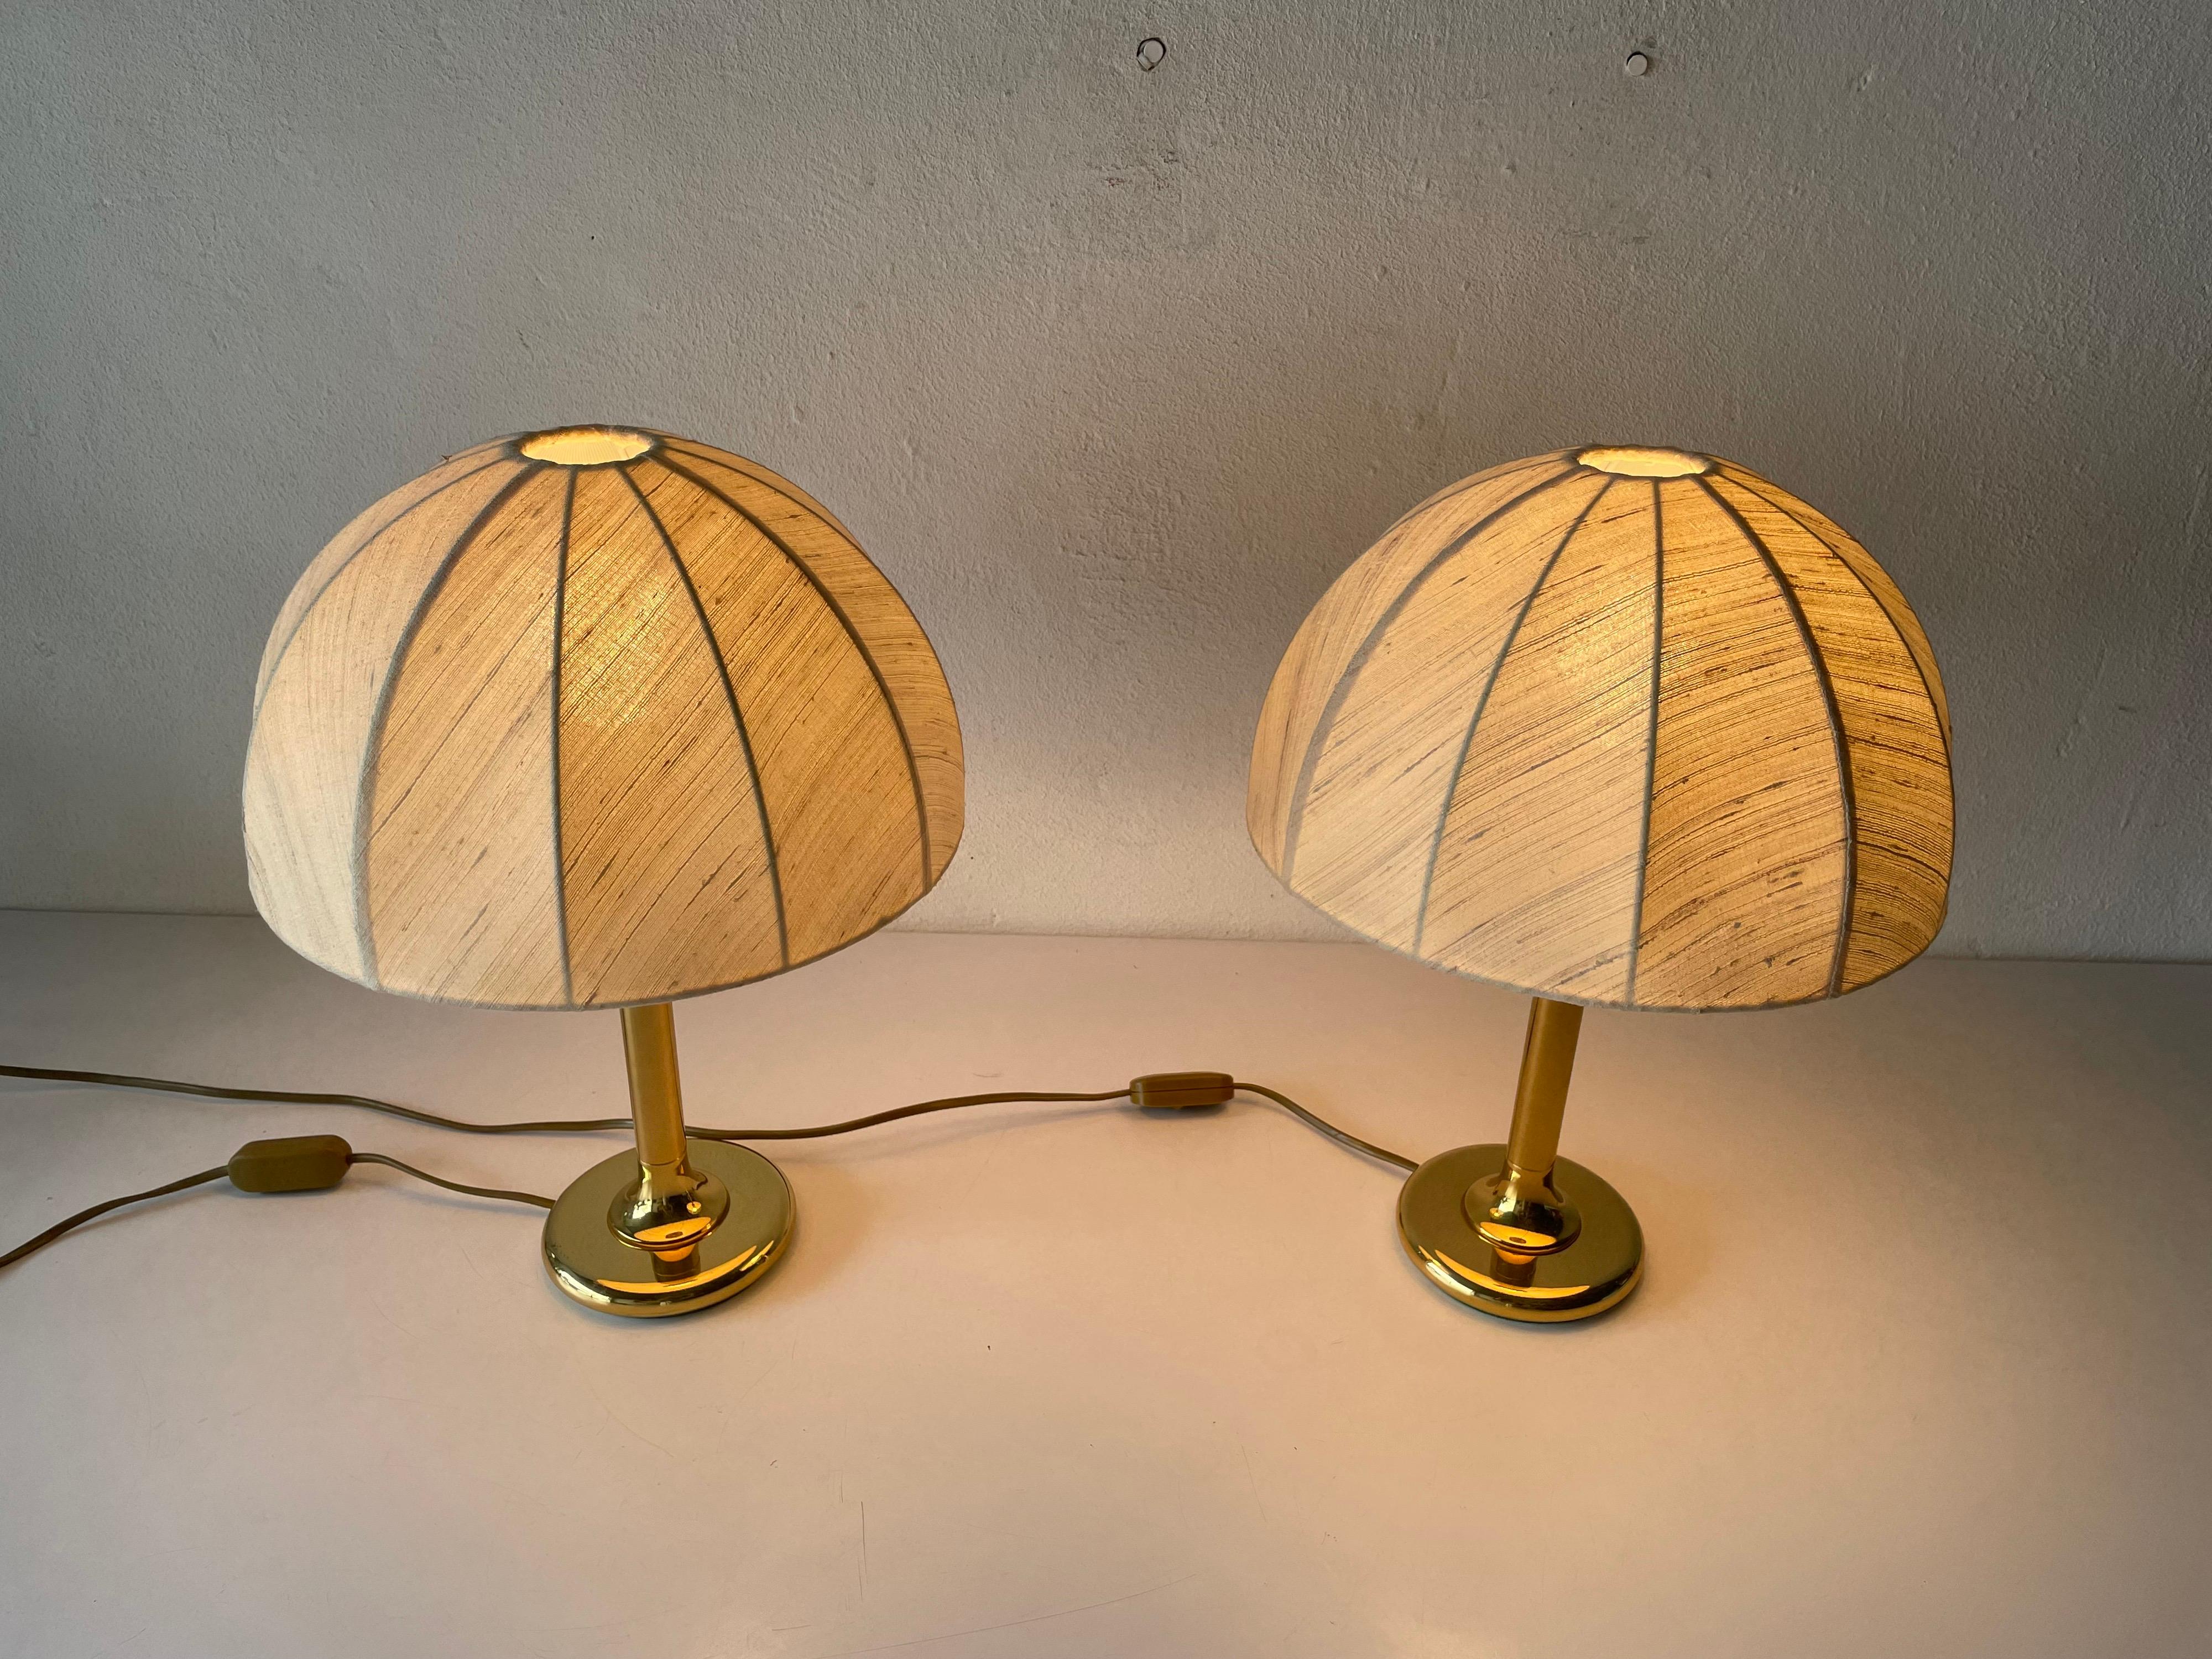 Fabric Shade & Brass Body Elegant Pair of Bedside Lamps by ERU, 1980s, Germany 3